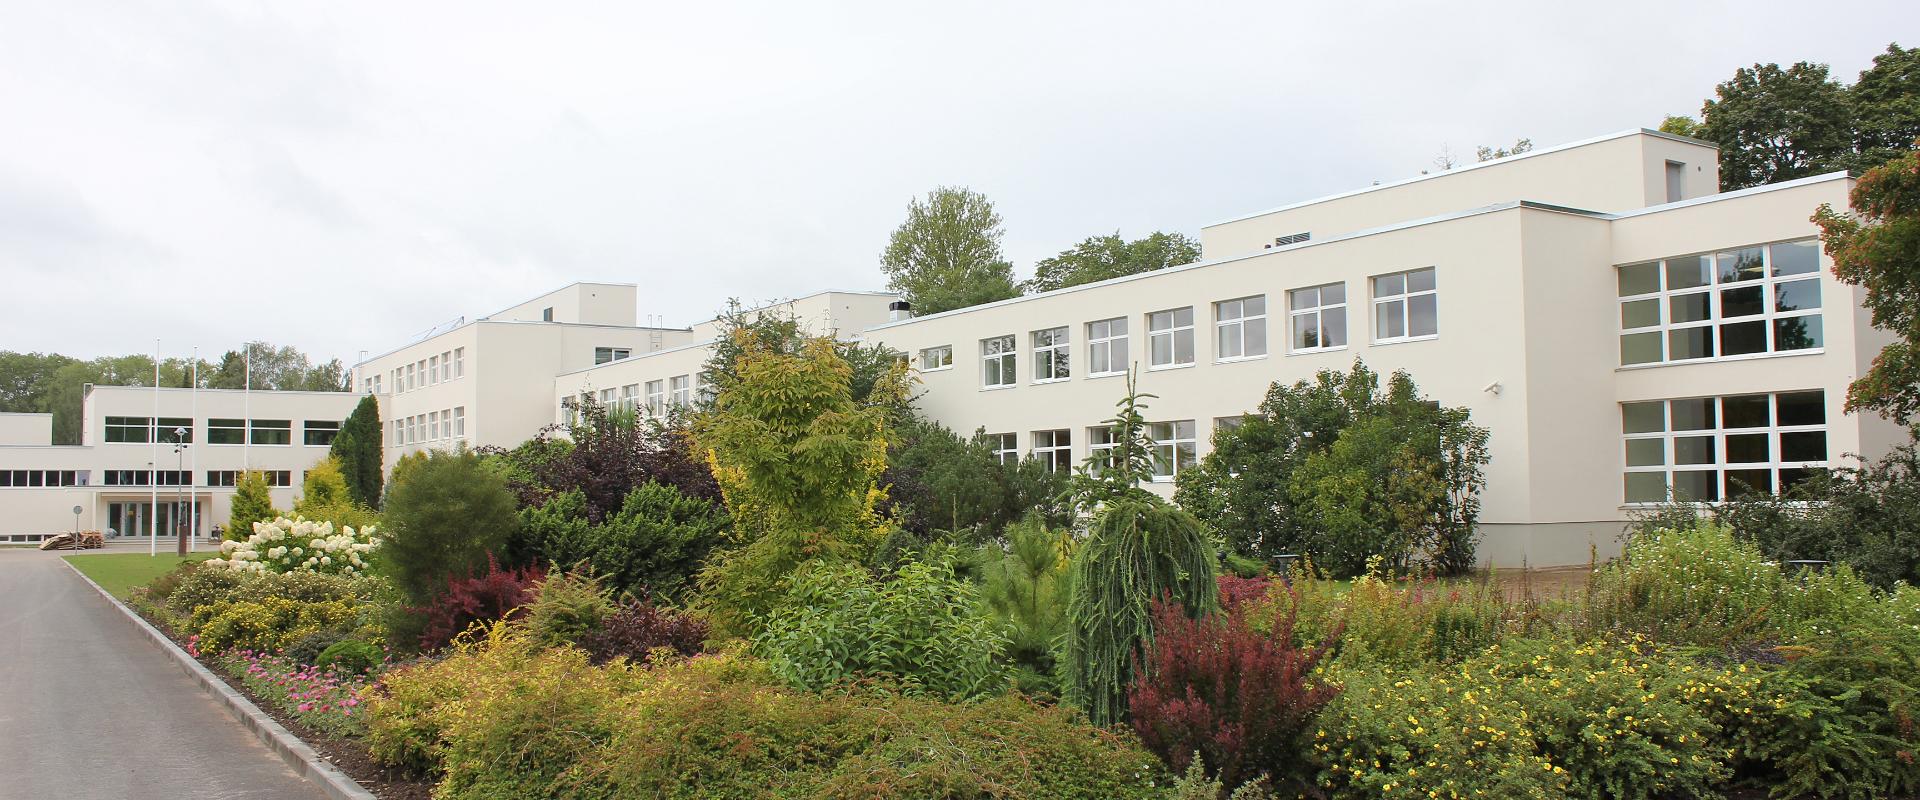 Räpina School of Horticulture collection garden